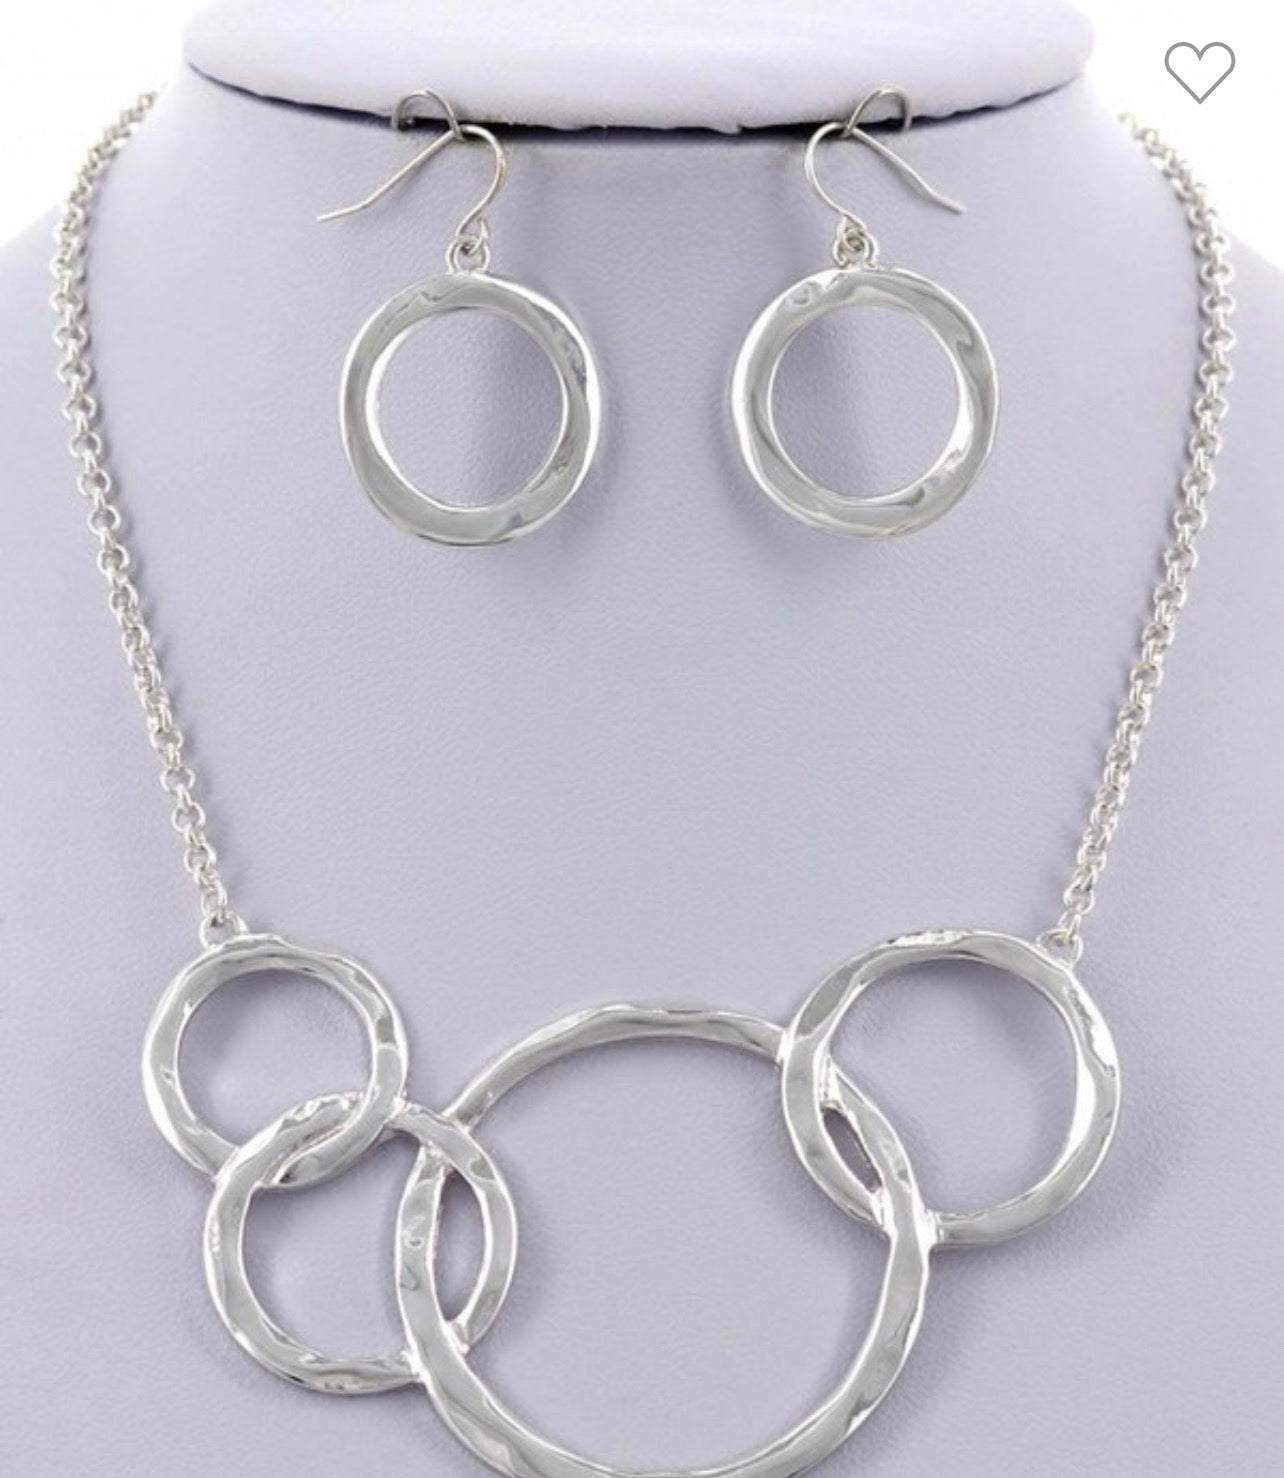 Overlapping, hammered rings, necklace, and earrings